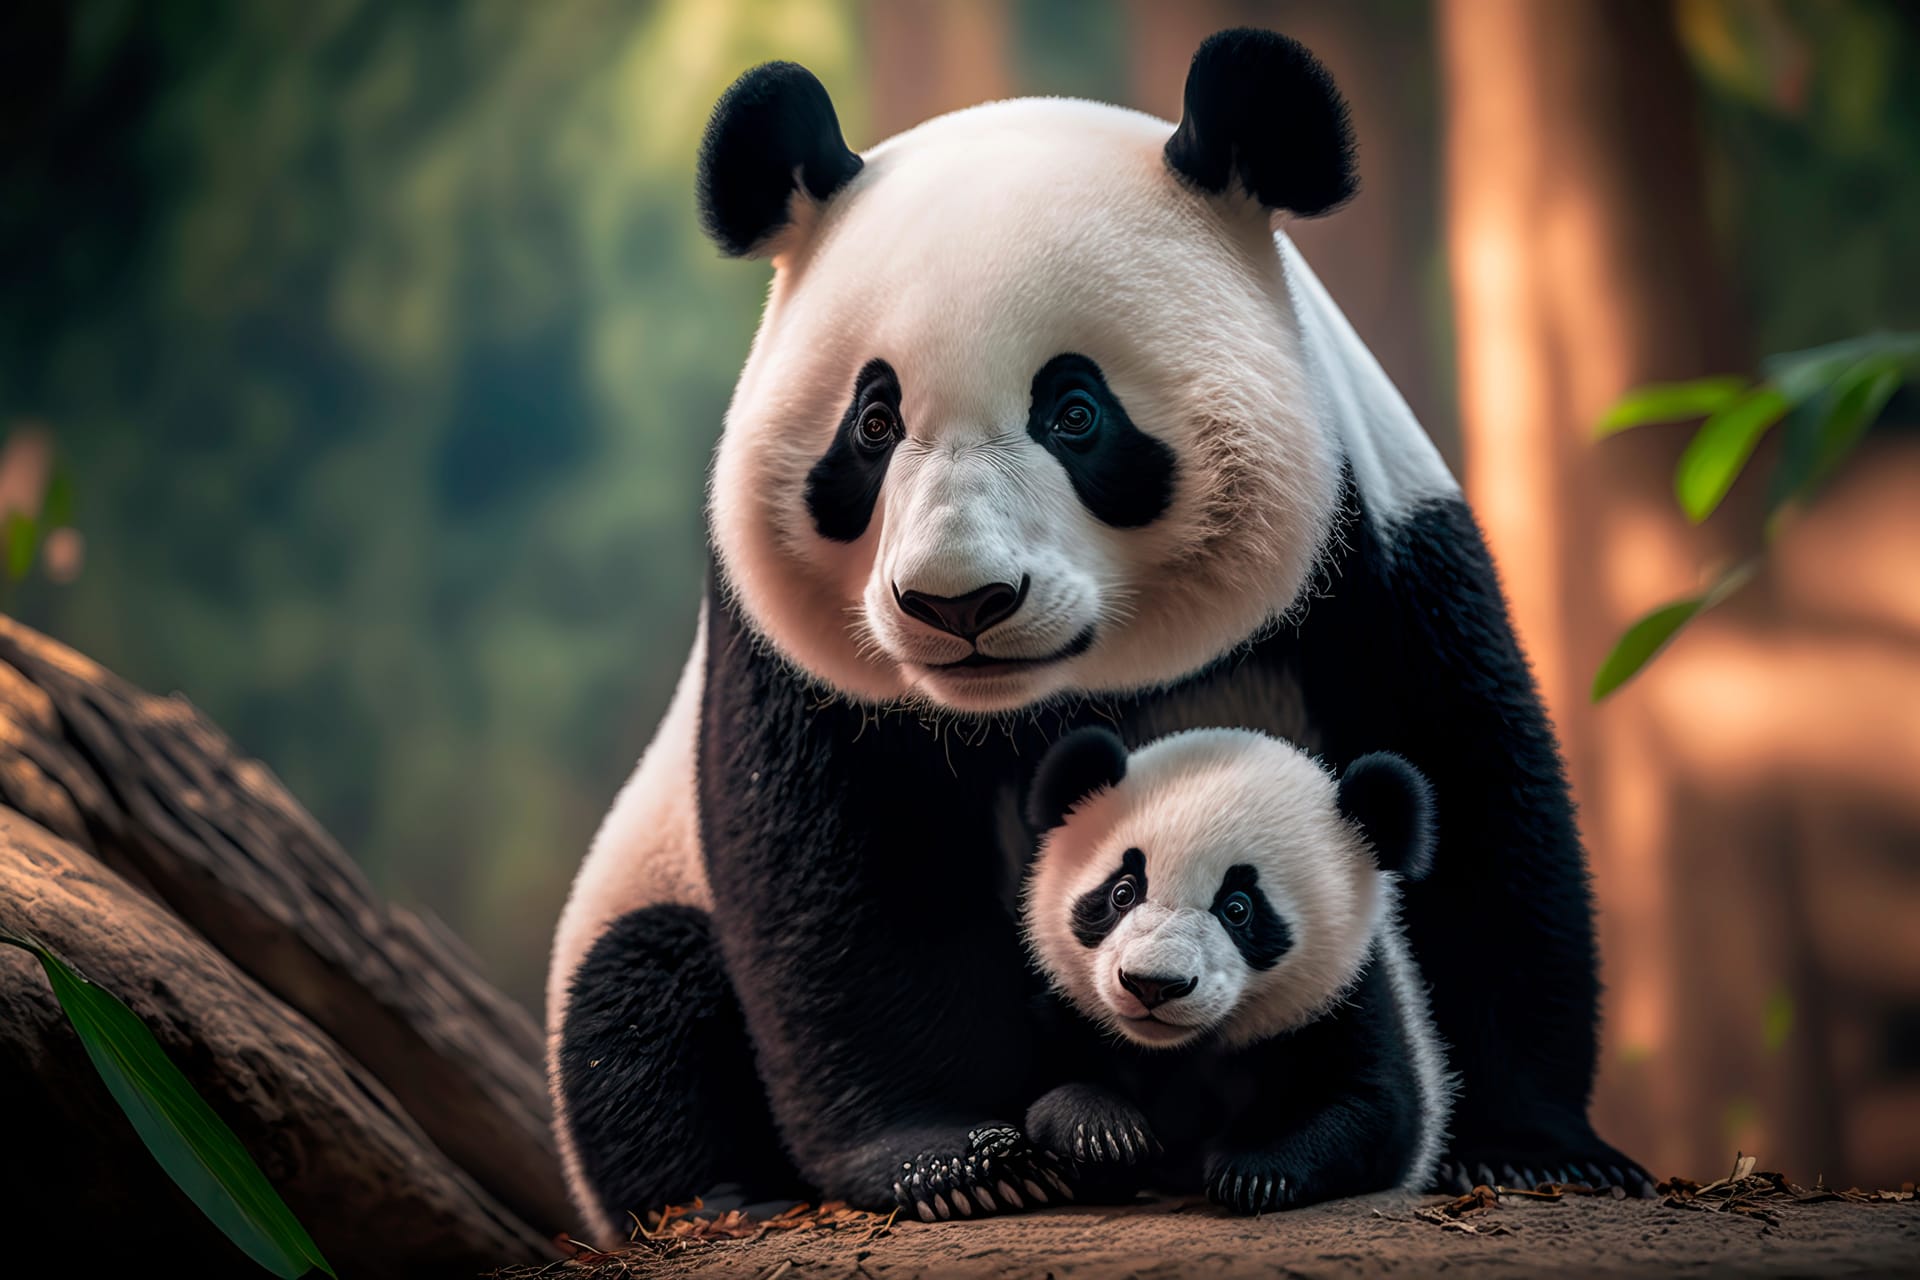 With baby panda happy together chinese park realistic digital illustration